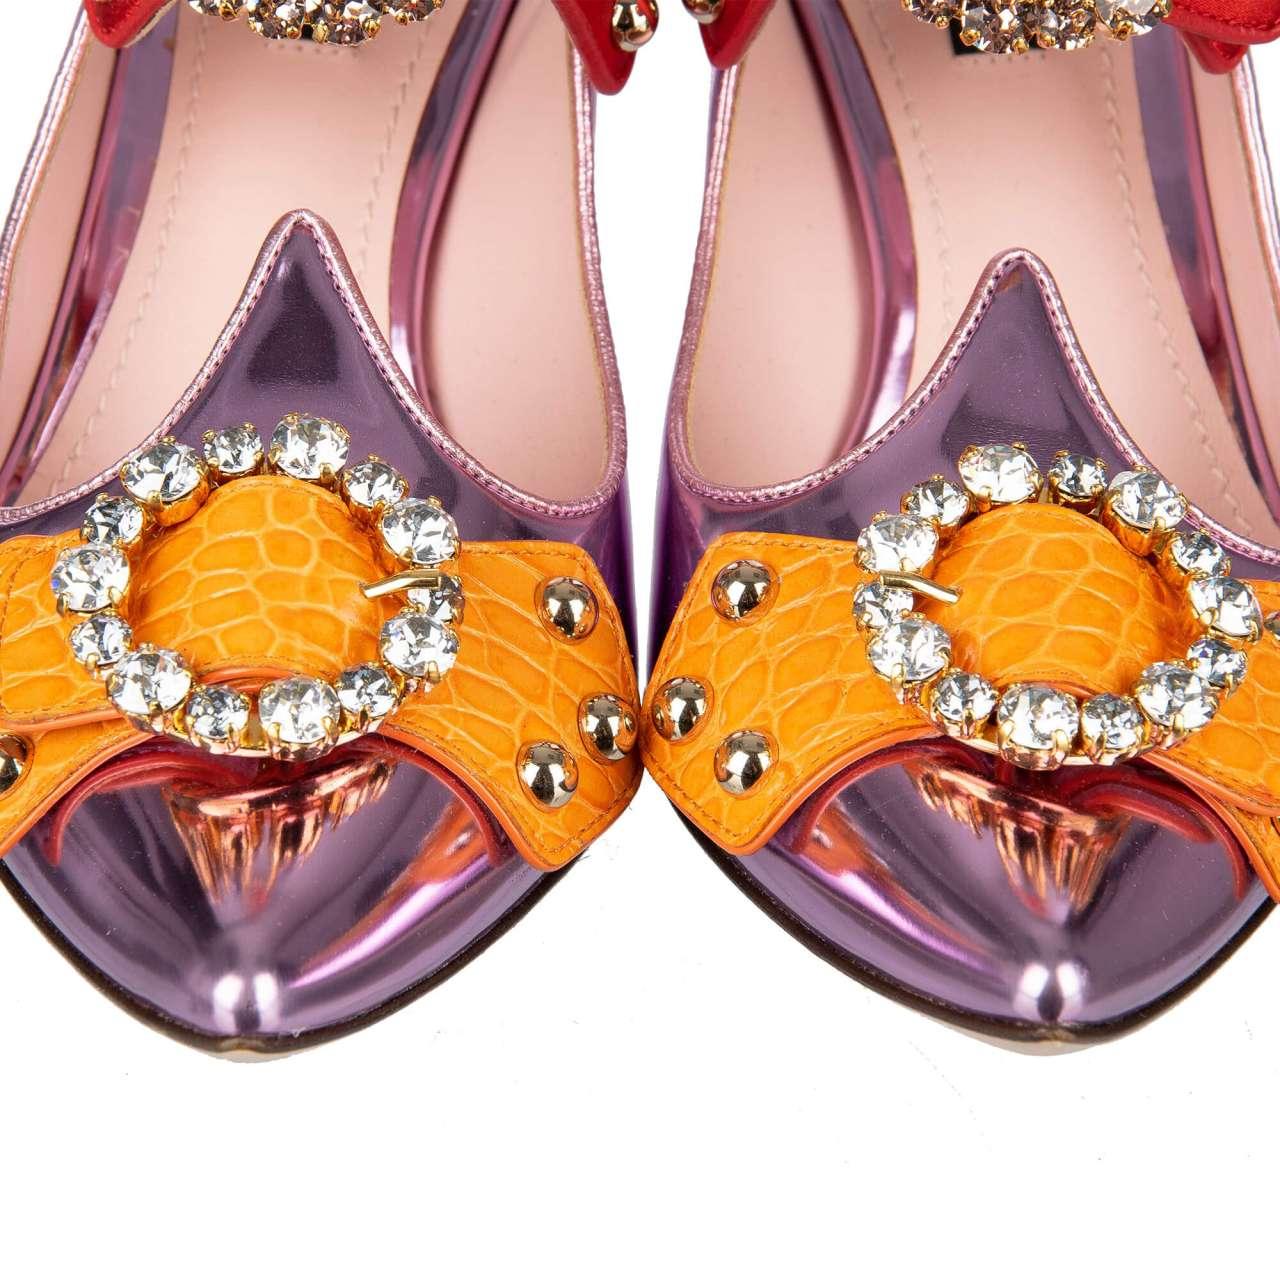 Dolce & Gabbana - Metallic Leather Mule Pumps ALADINO with Crystals Pink EUR 36 For Sale 4